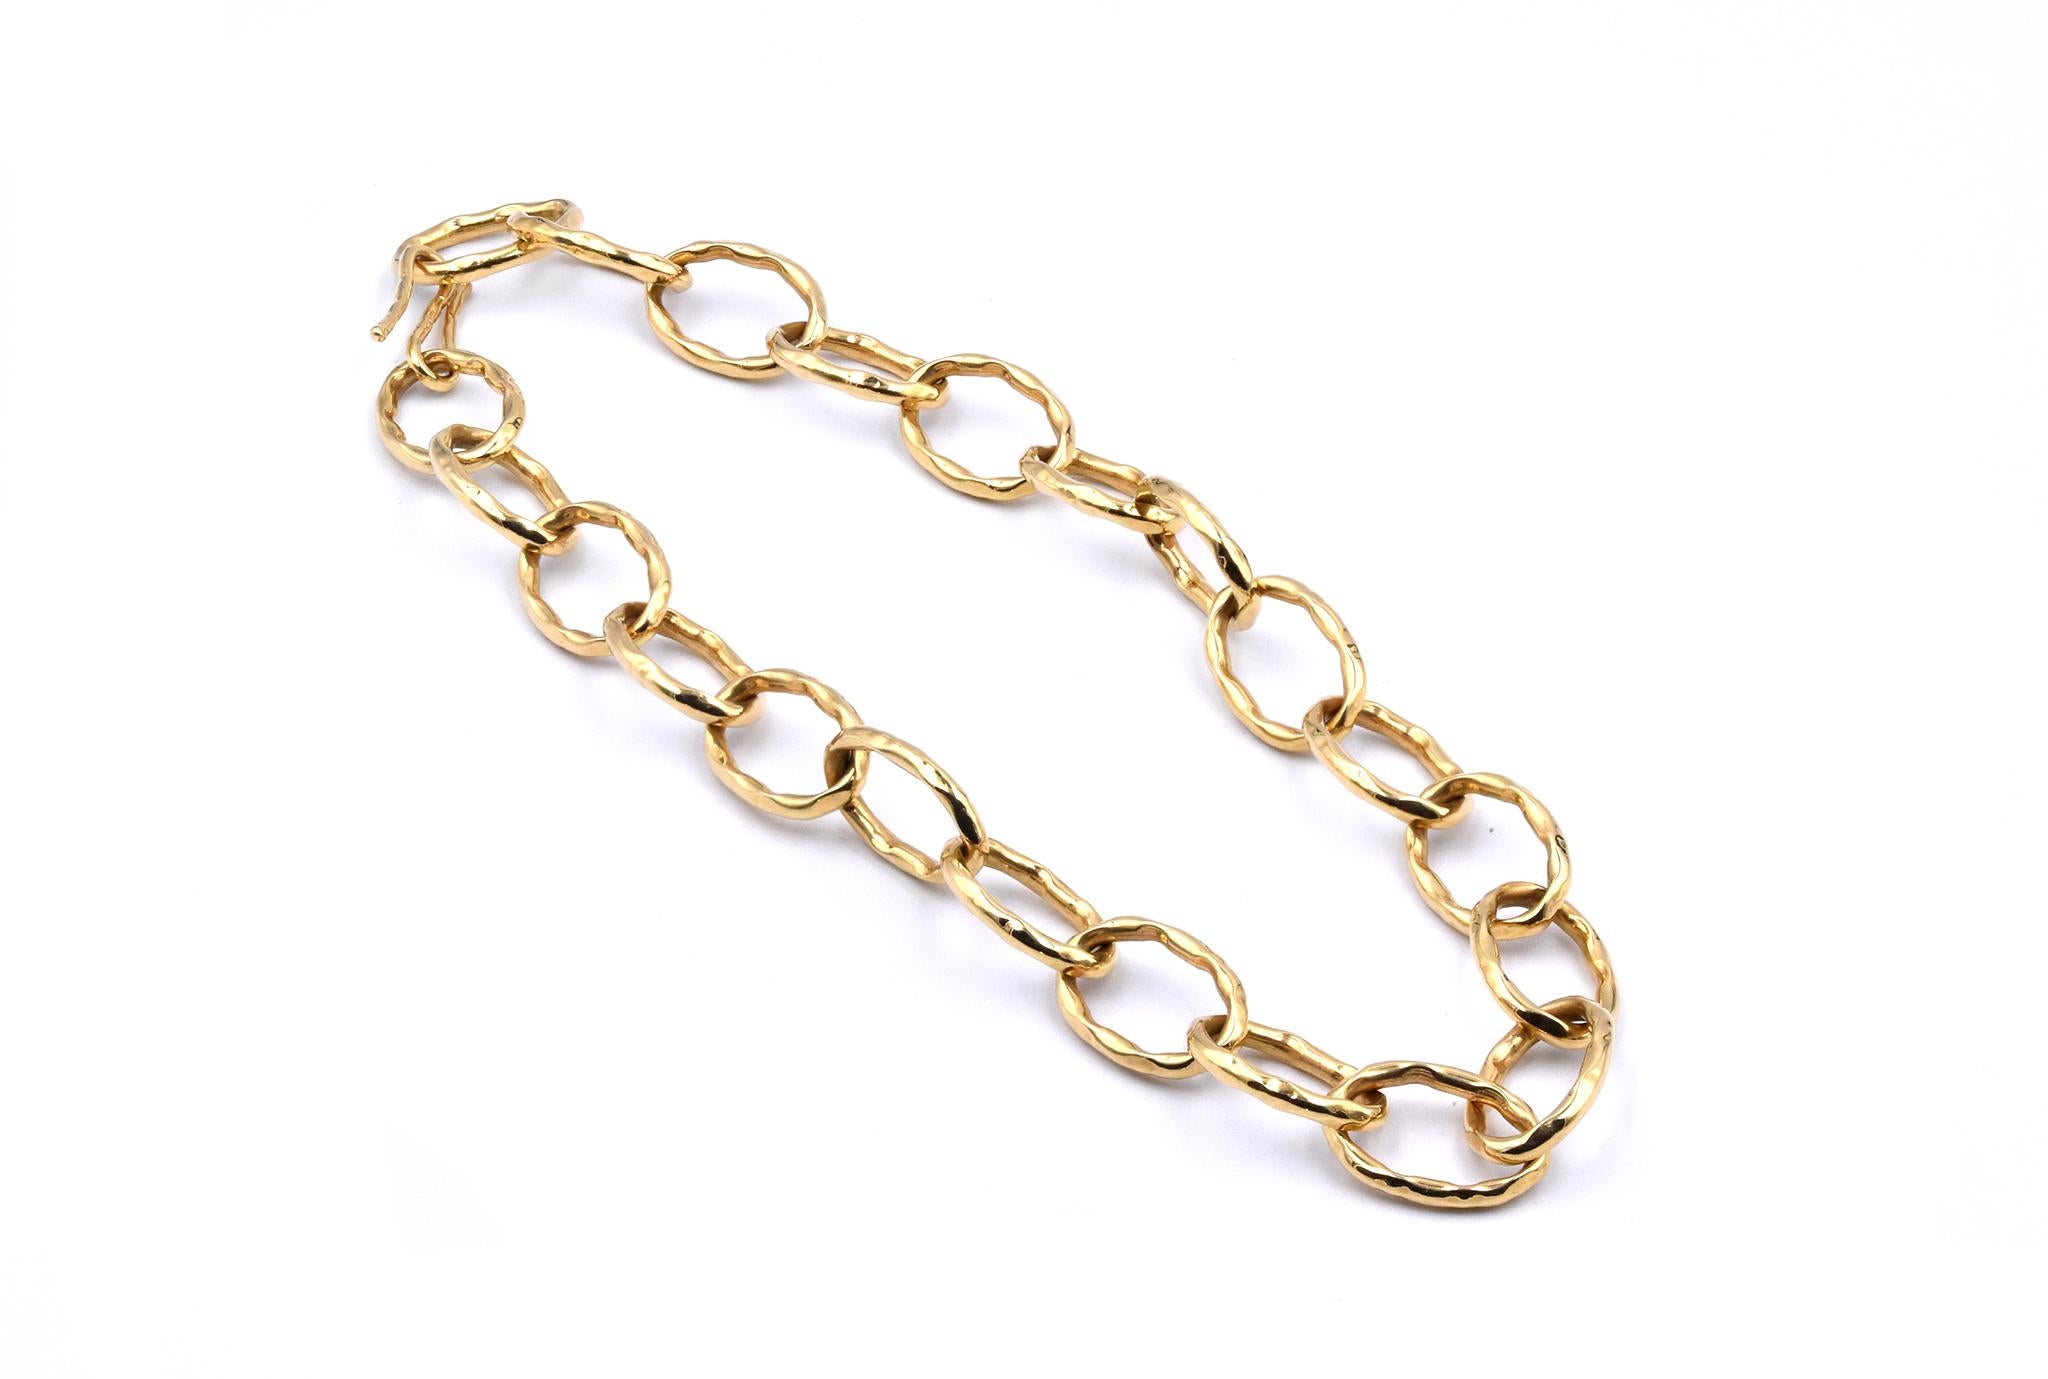 Designer: Roberto Coin
Material: 18K yellow gold
Weight: 37.04 grams
Measurements: necklace measures 18-inches 
